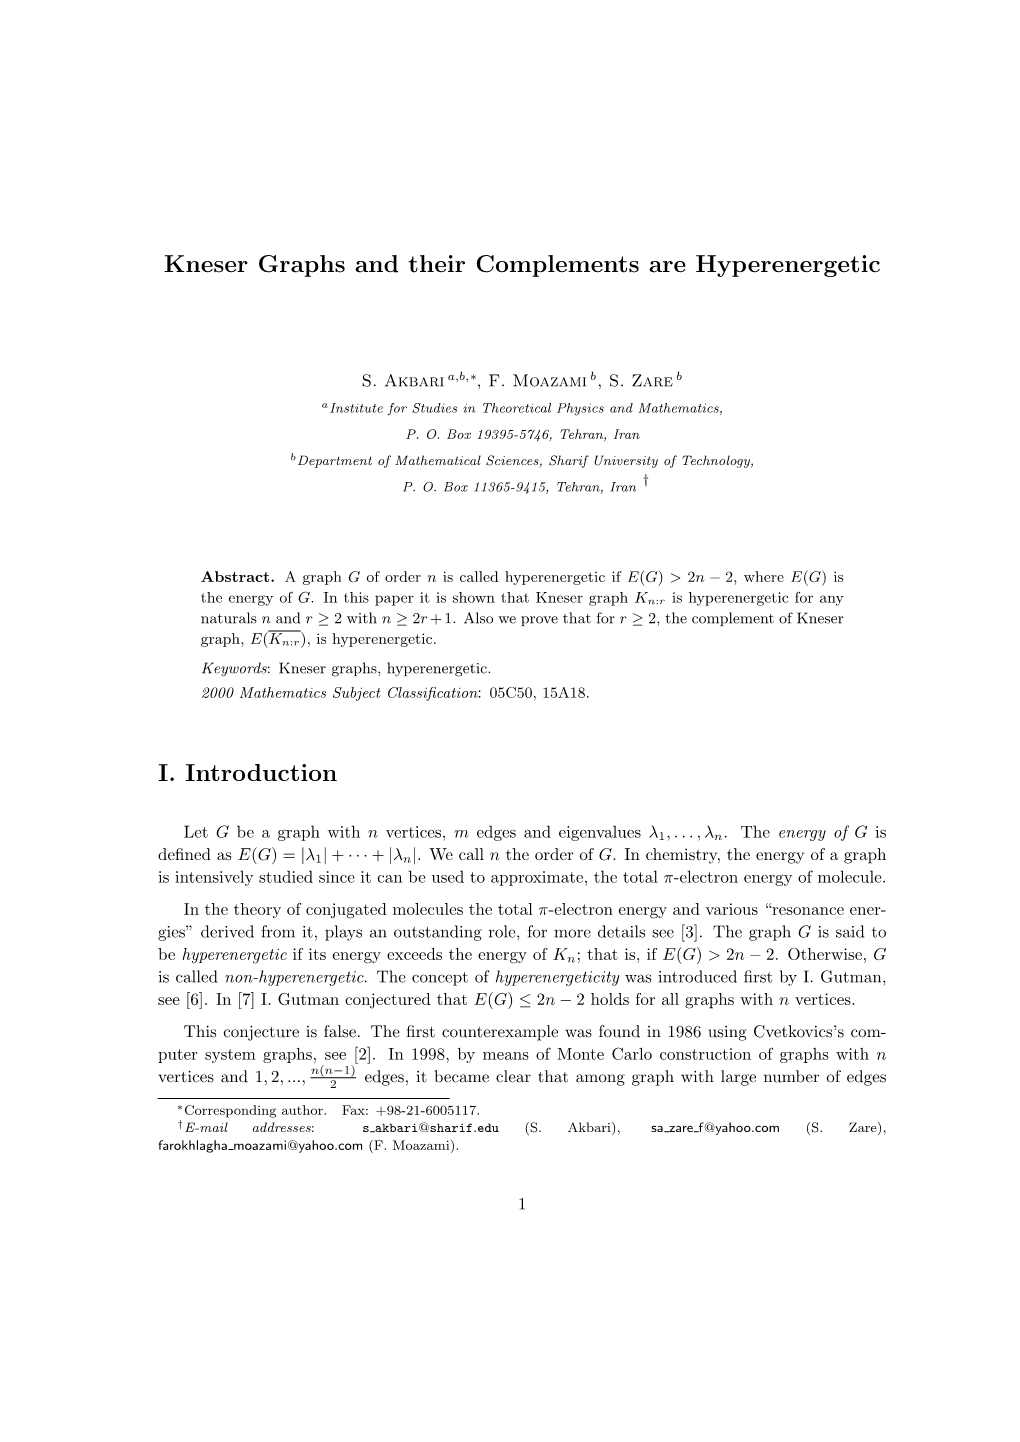 Kneser Graphs and Their Complements Are Hyperenergetic I